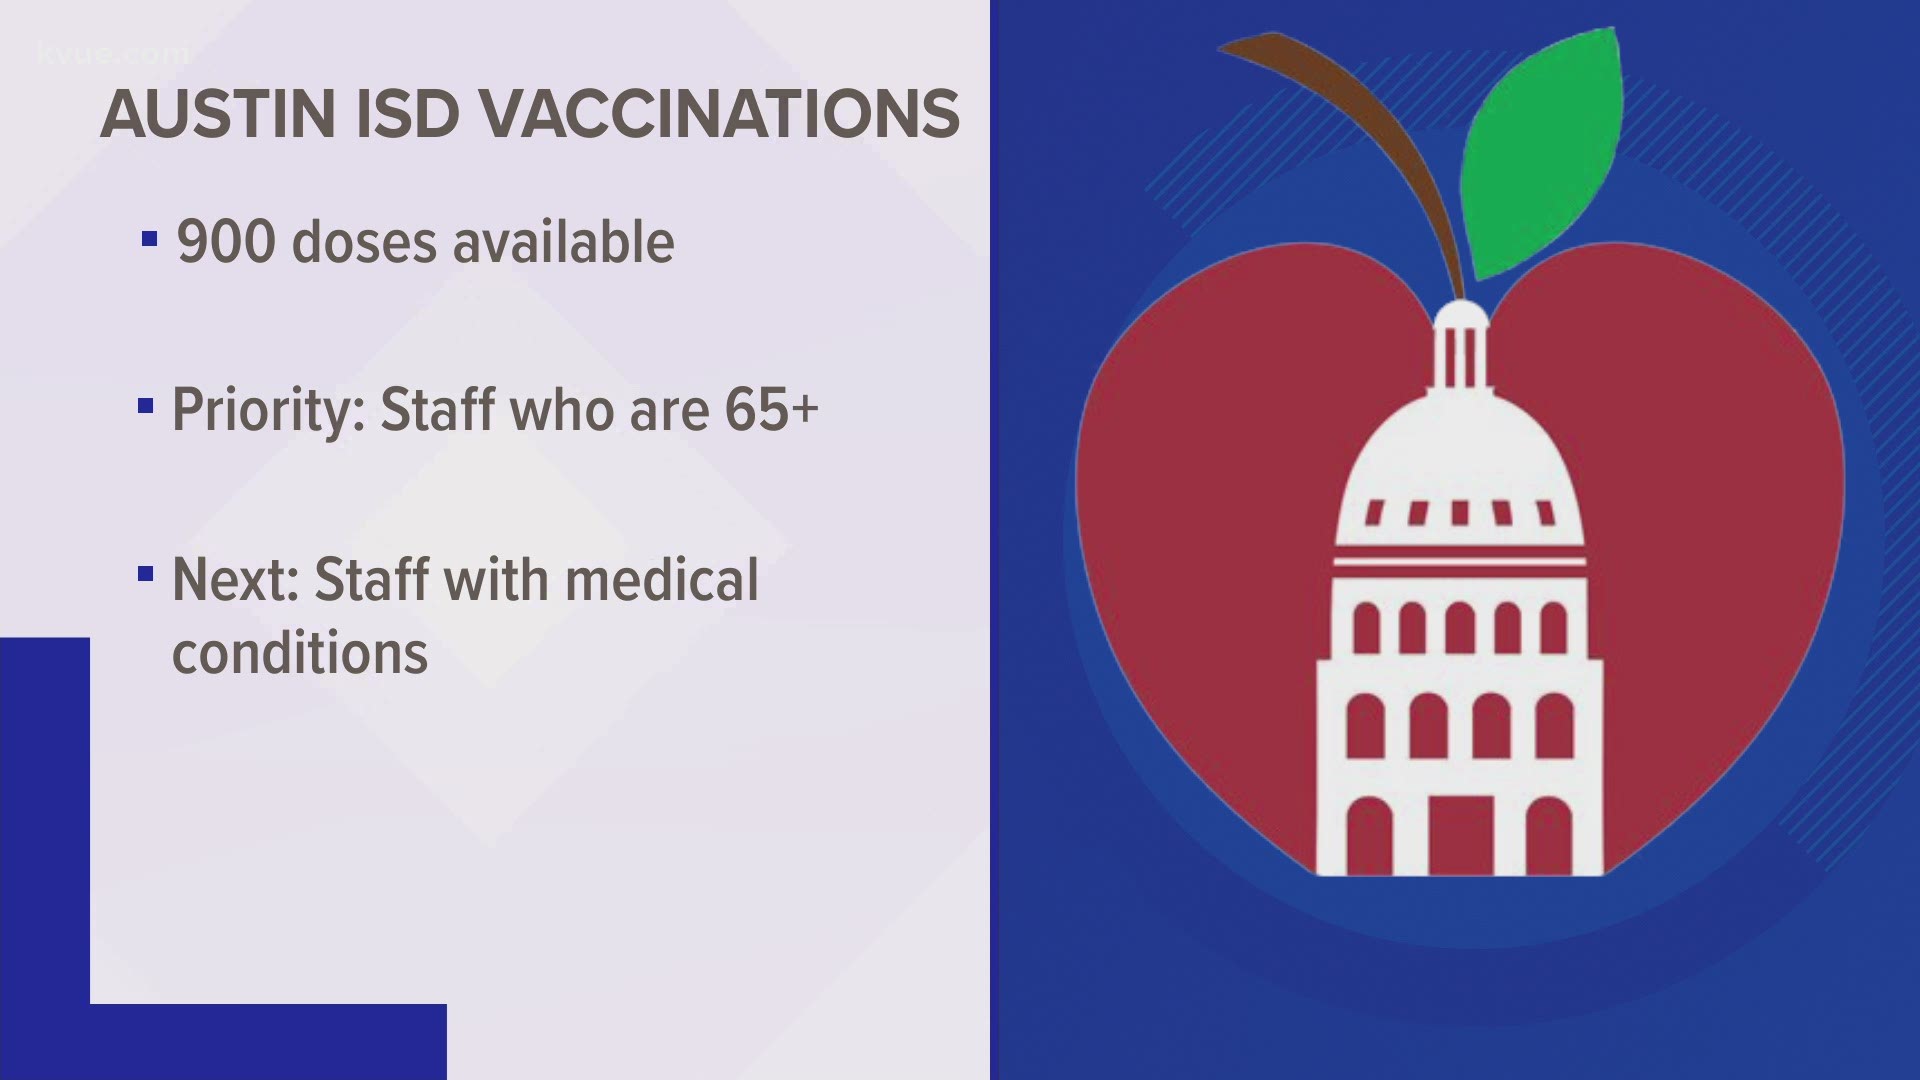 Austin ISD, in partnership with Ascension Seton, has begun outreach to Austin ISD staff eligible to receive the first round of limited COVID-19 vaccines.